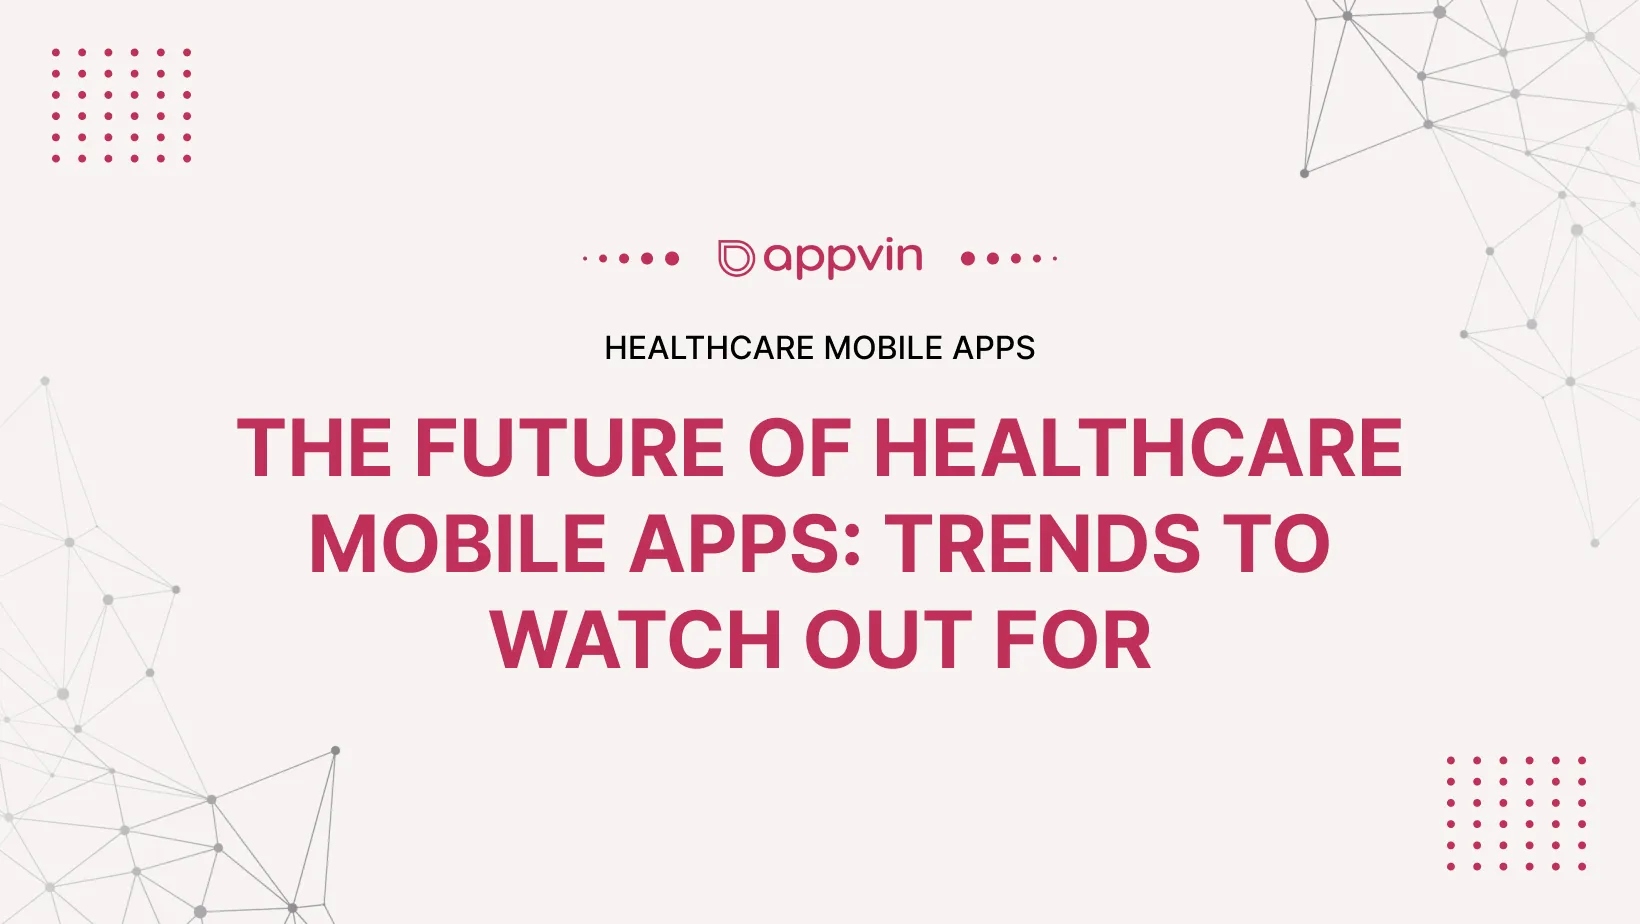 The Future of Healthcare Mobile Apps: Trends to Watch Out For